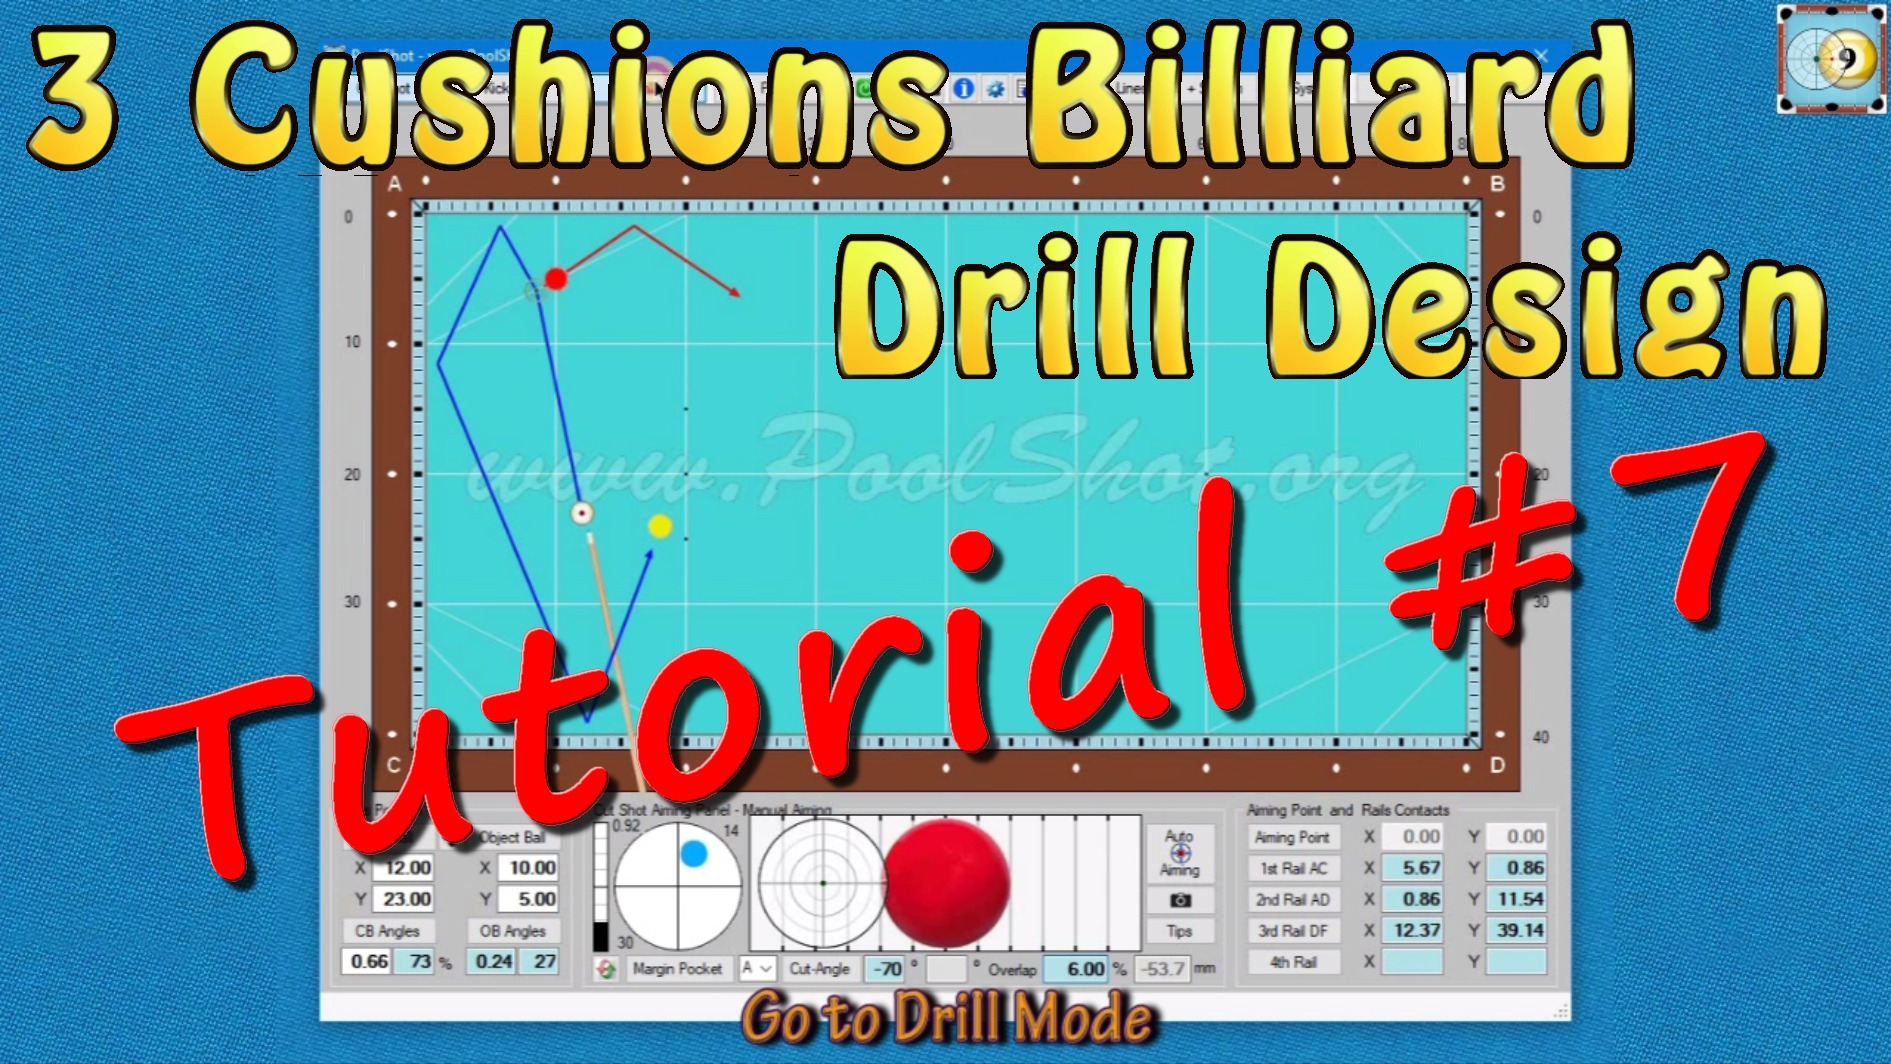 How To Design a 3-Cushions Drill with PoolShot Software